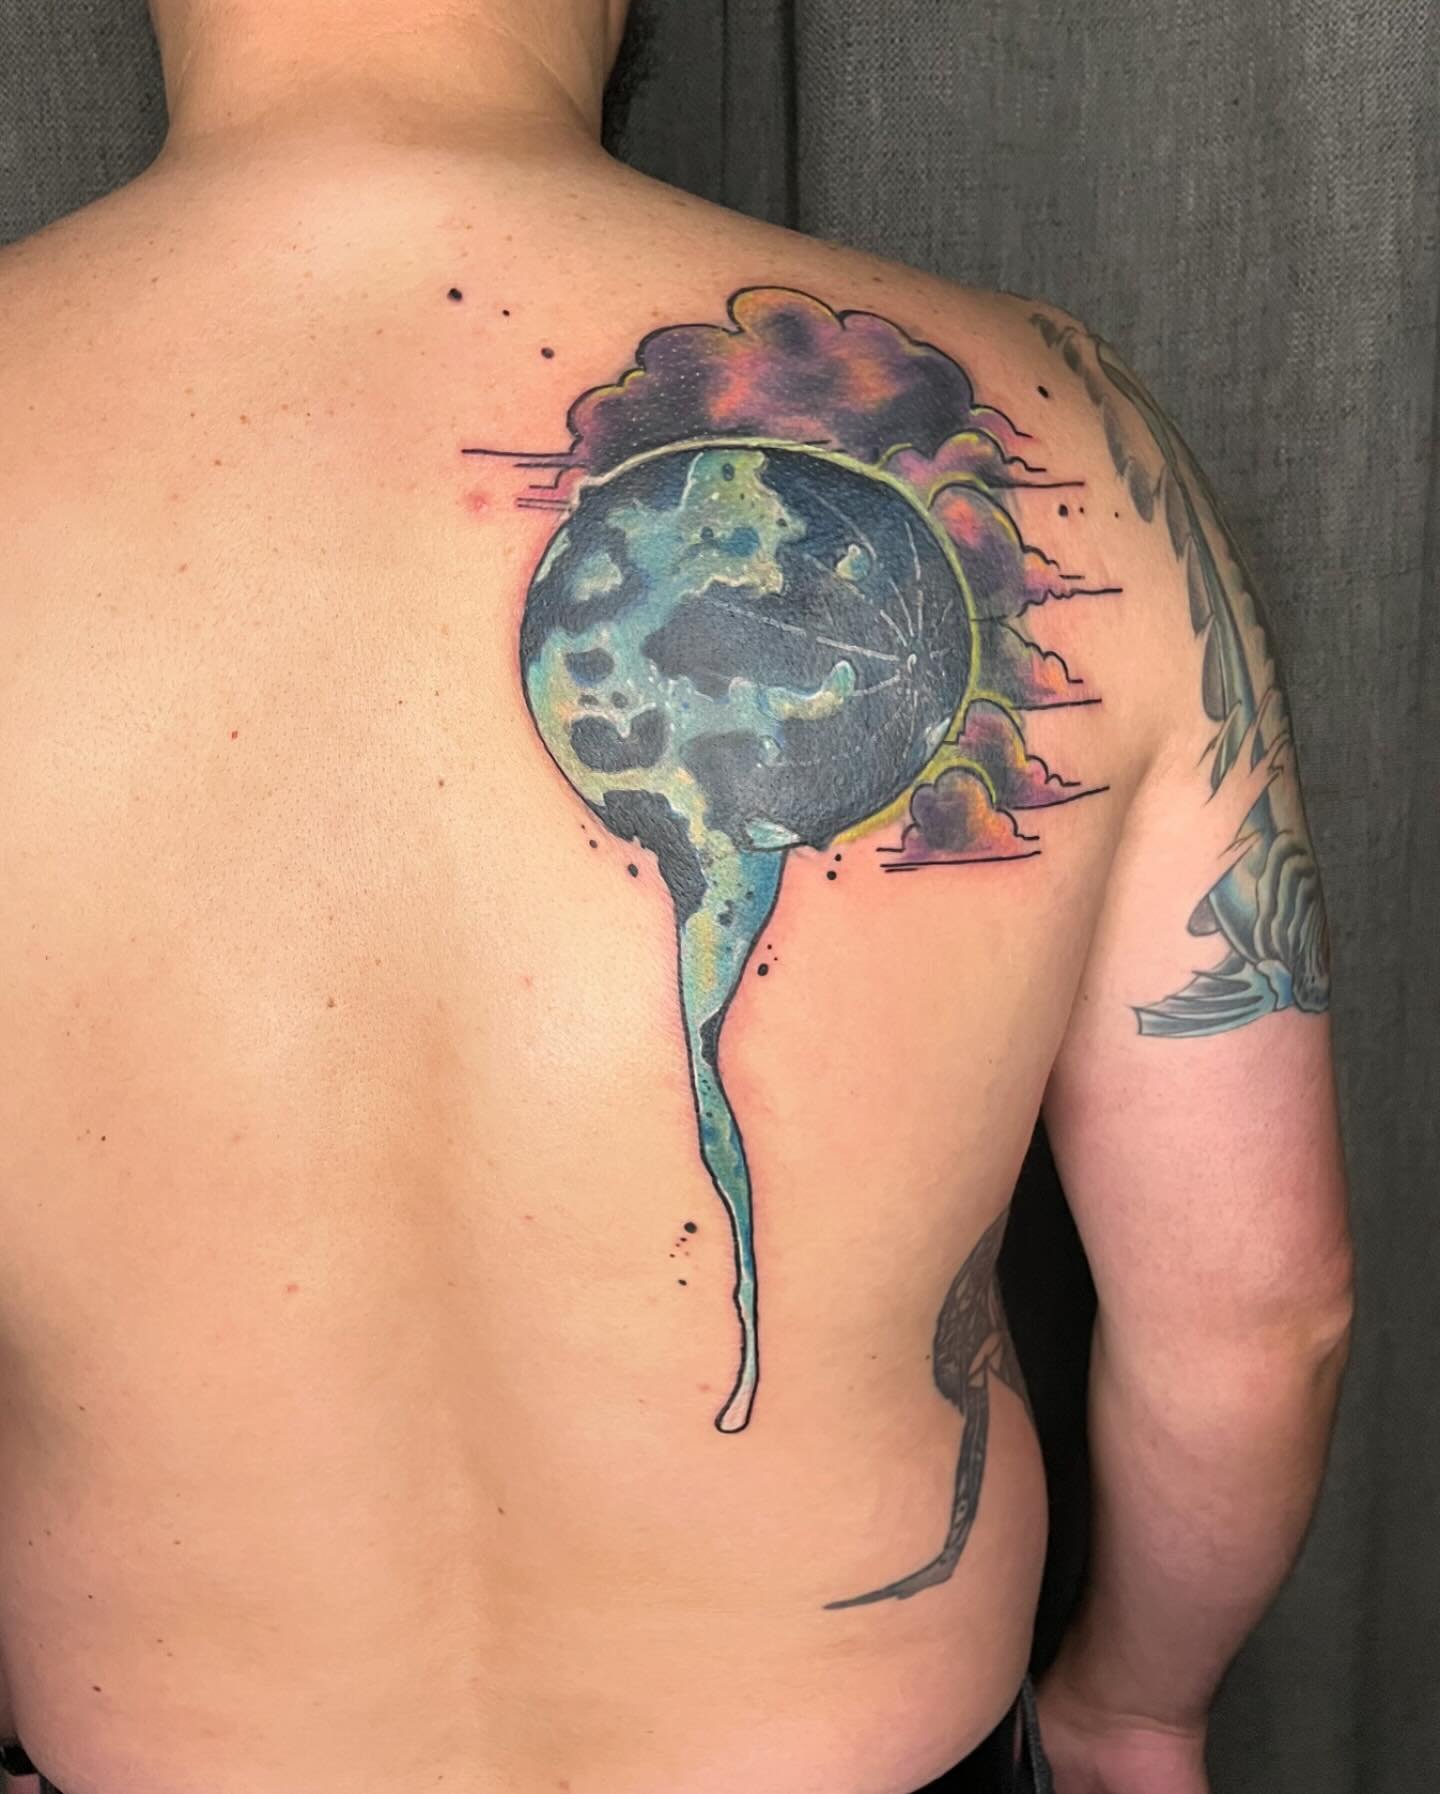 Justin grabbed the Drippy Moon from my &ldquo;want to do&rdquo; list last month.  We decided to take it and level up with this cover up tattoo.  1st sitting 3hrs. Much more work to come!

 #watercolortattoo #moderntattoo #tattrx #coveruptattoo #nashv